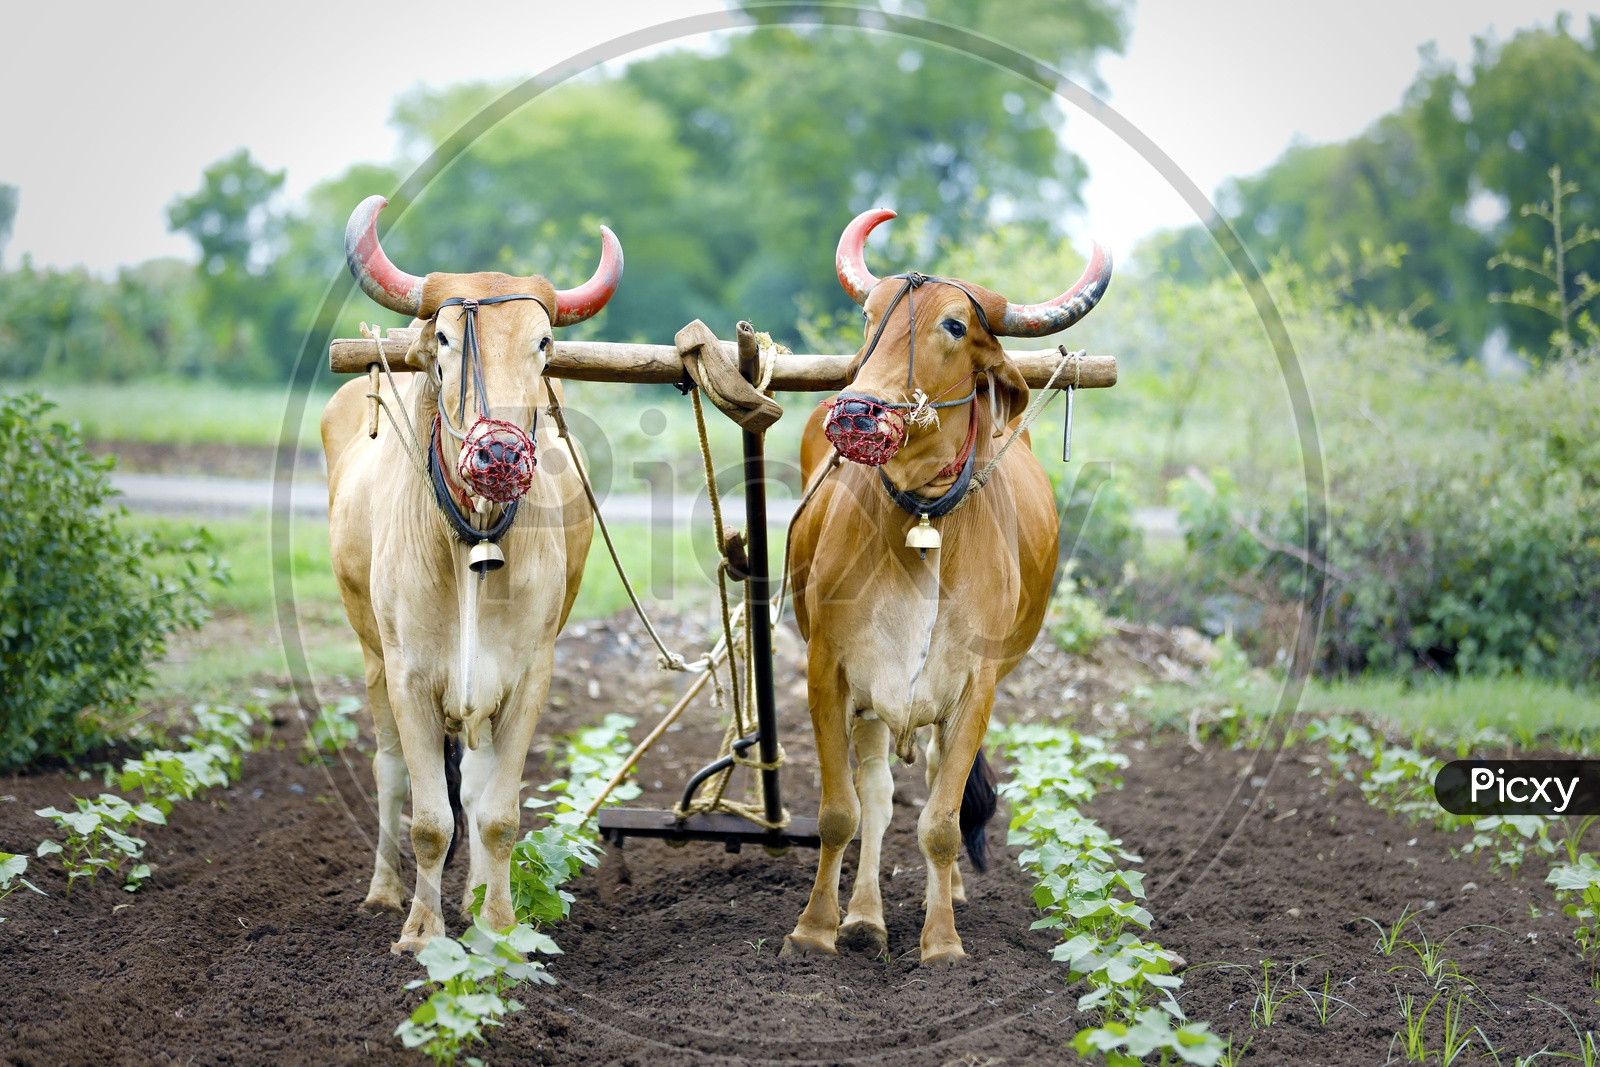 Bullocks Ploughing In Indian Agricultural Fields